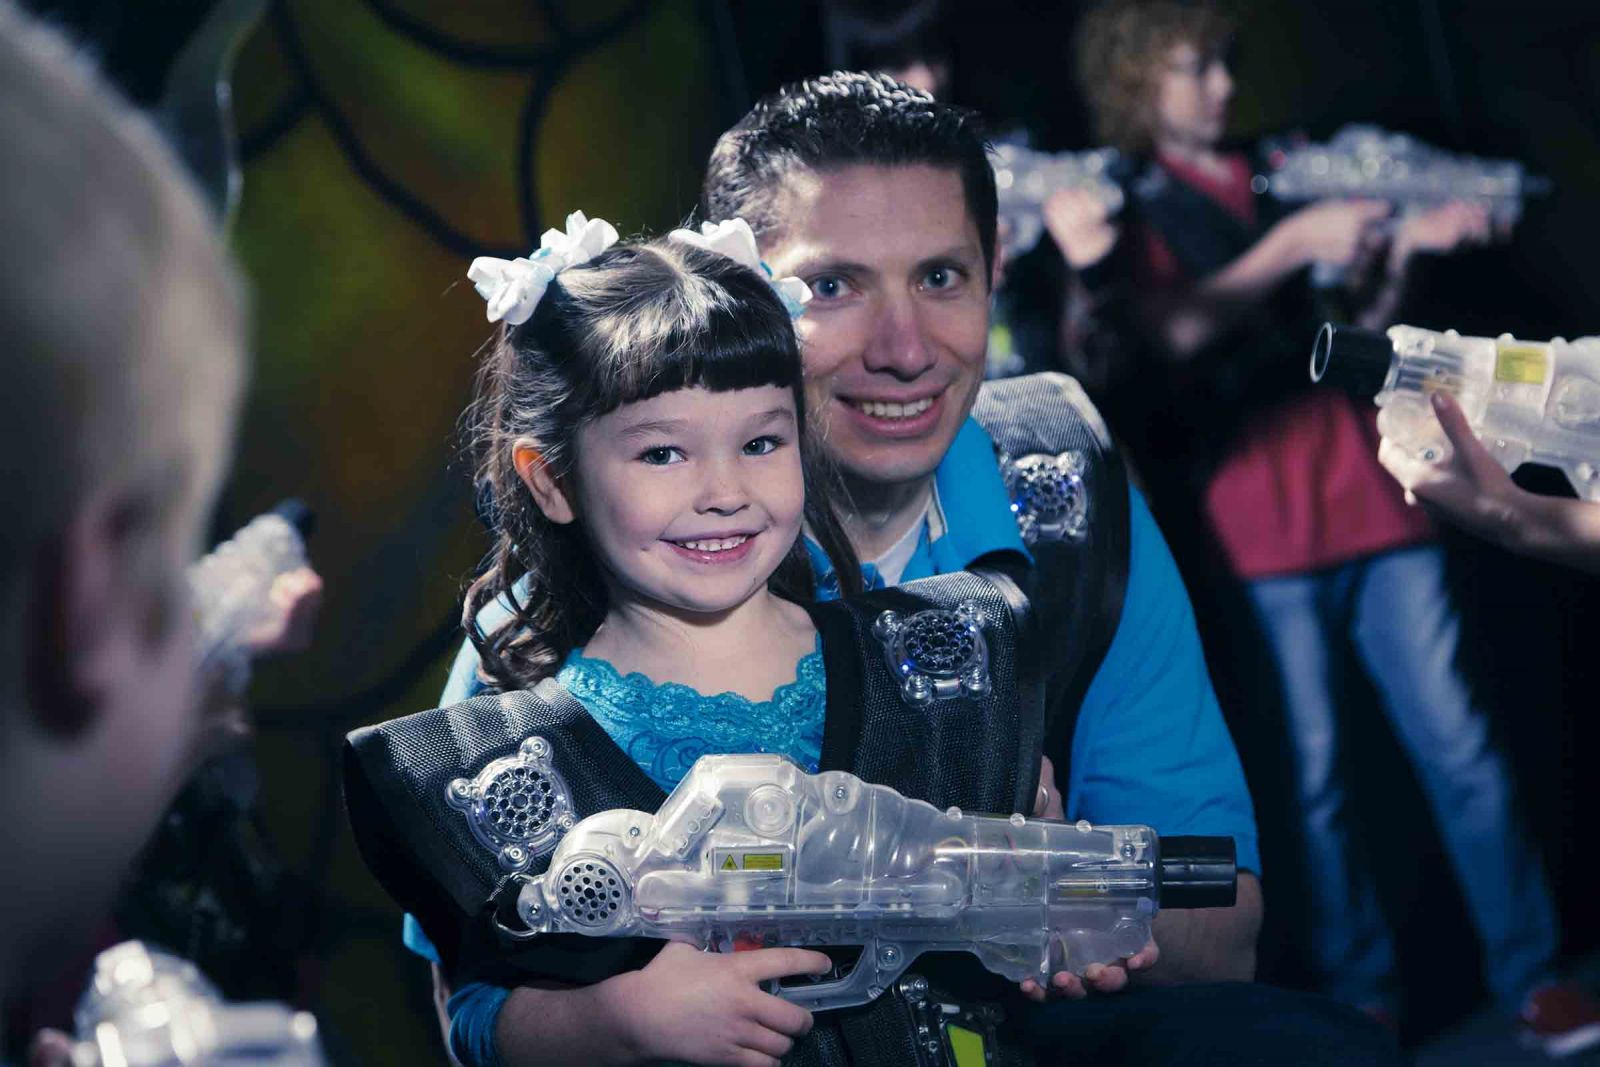 Dad and daughter playing laser tag together